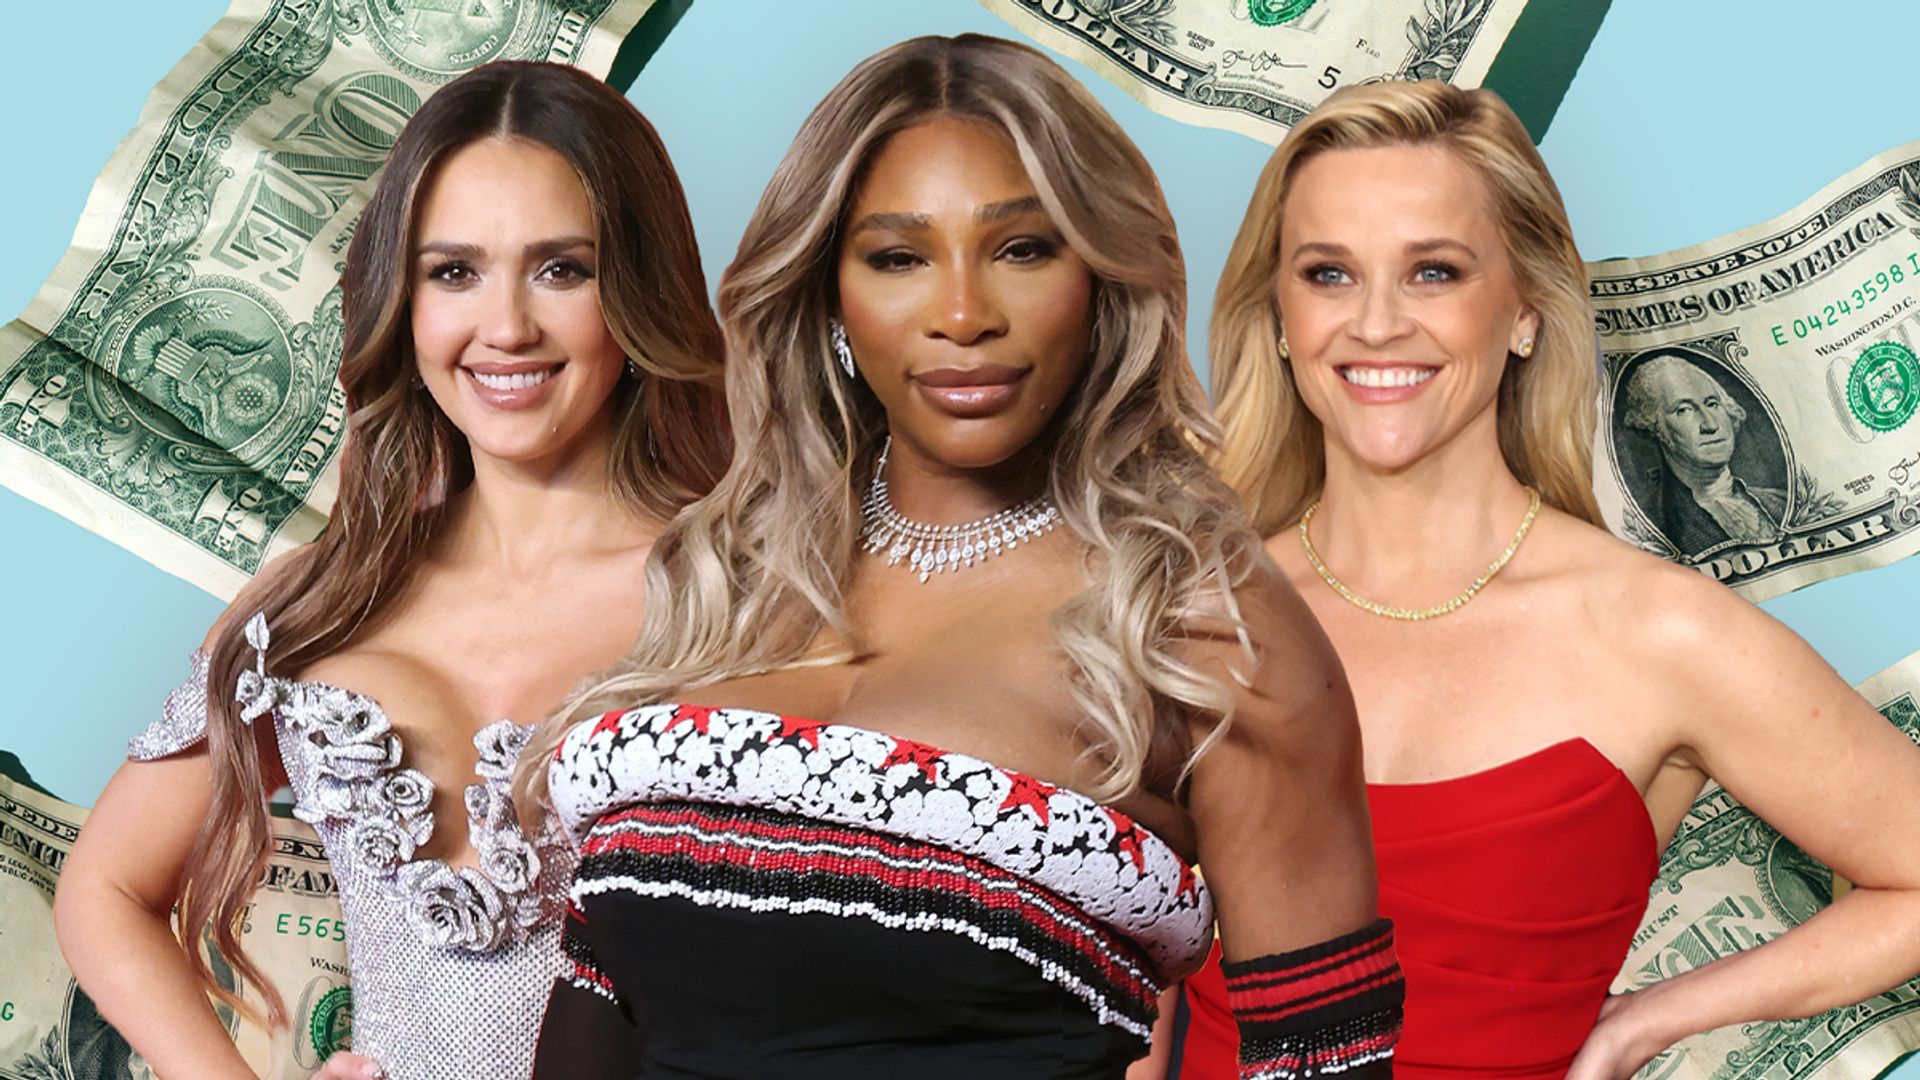 Jessica Alba Serena Williams and Reese Witherspoon composite image over dollar bills 